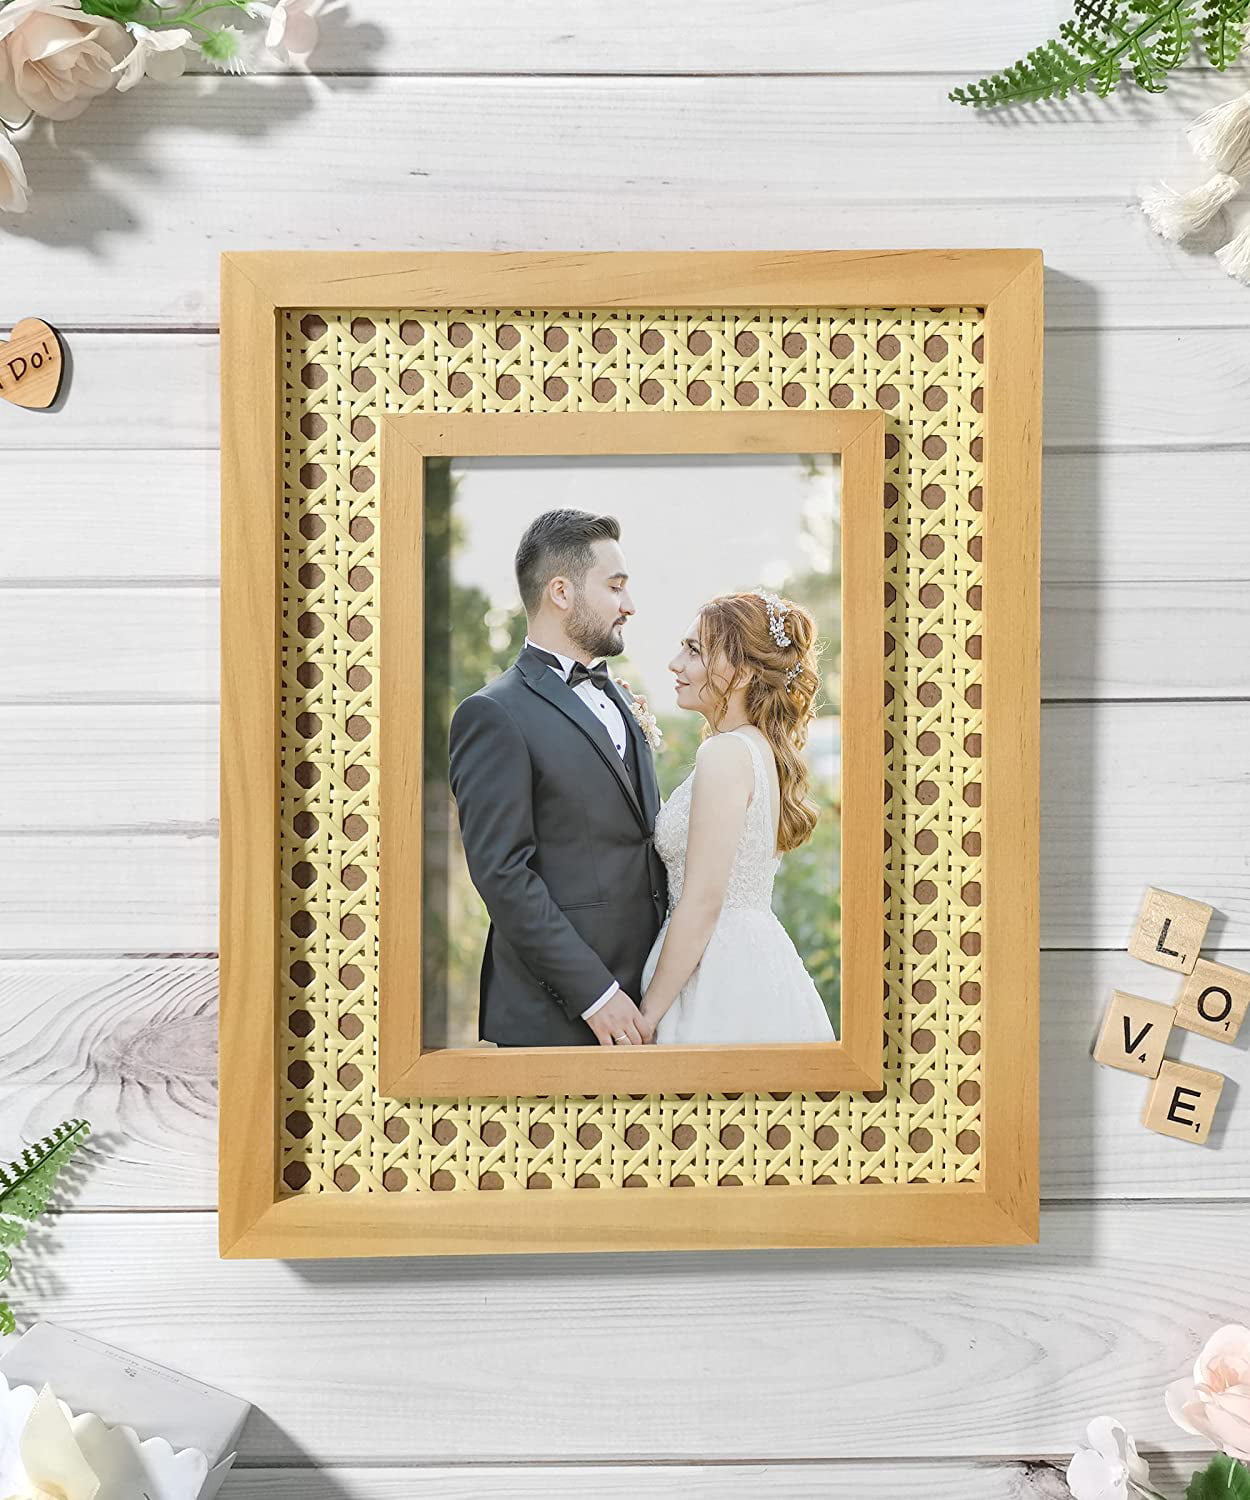  GLM Farmhouse Picture Frames, Holds 4 Photos,4x6 with